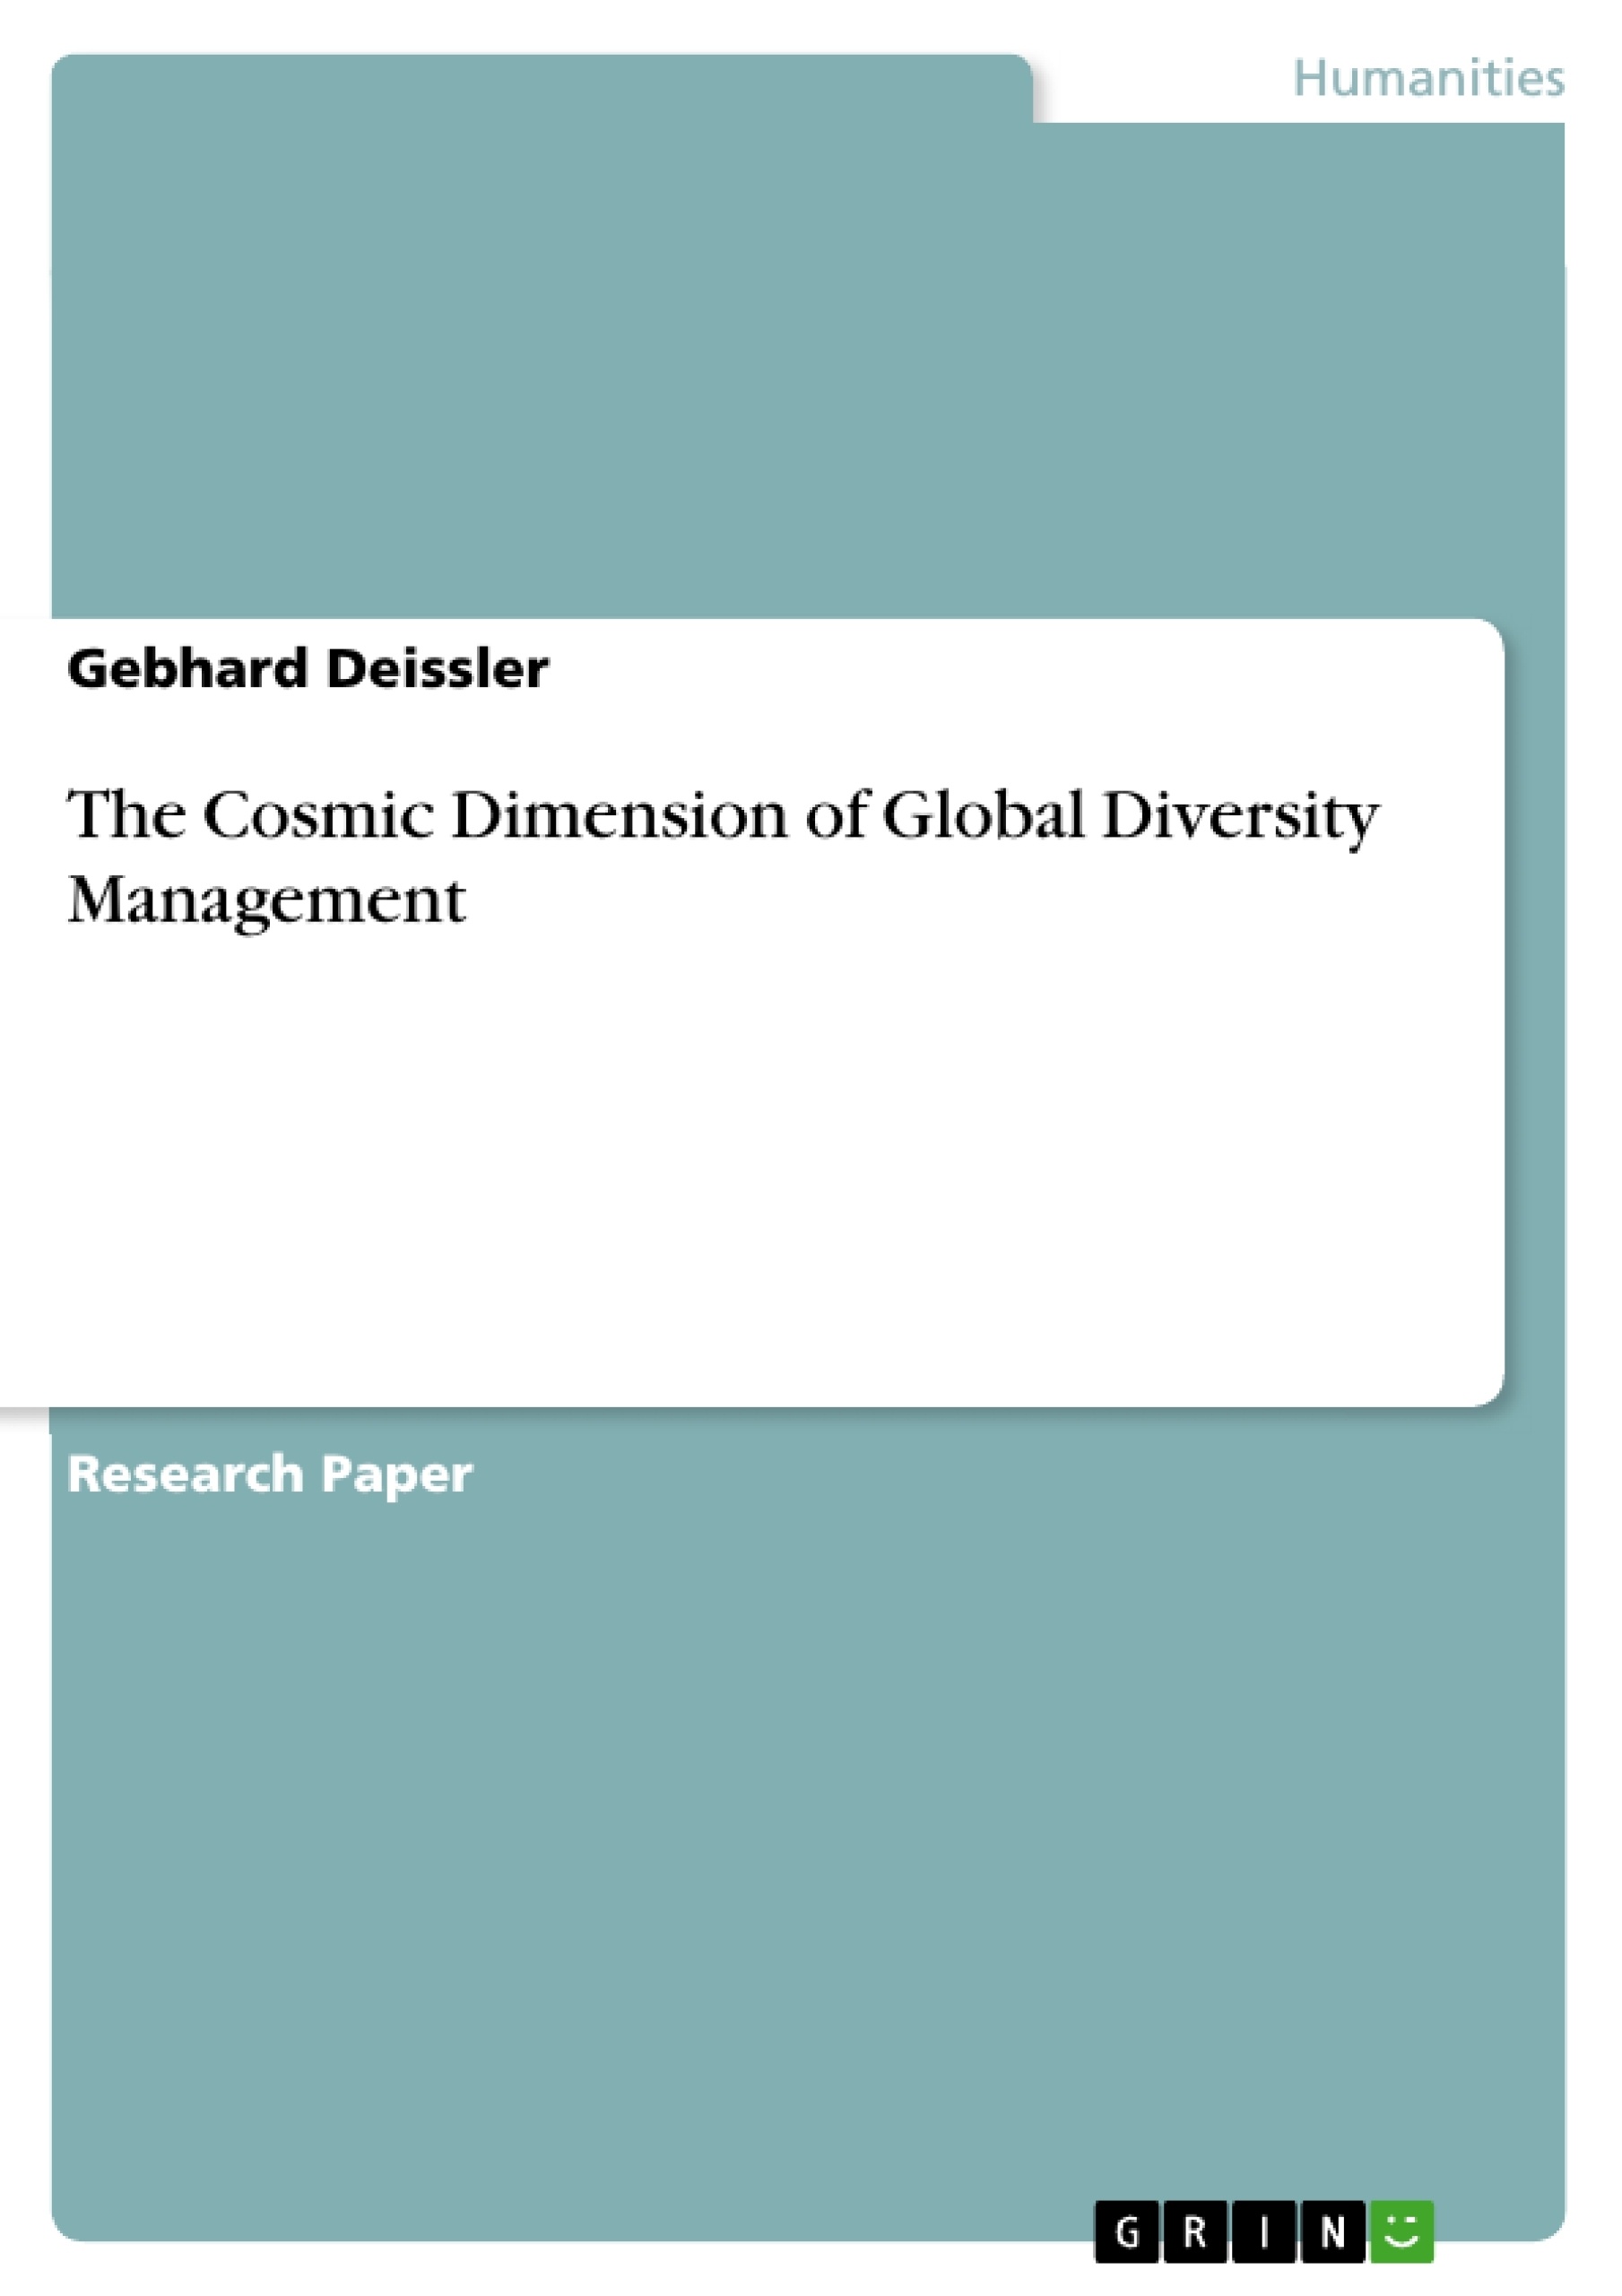 Title: The Cosmic Dimension of Global Diversity Management